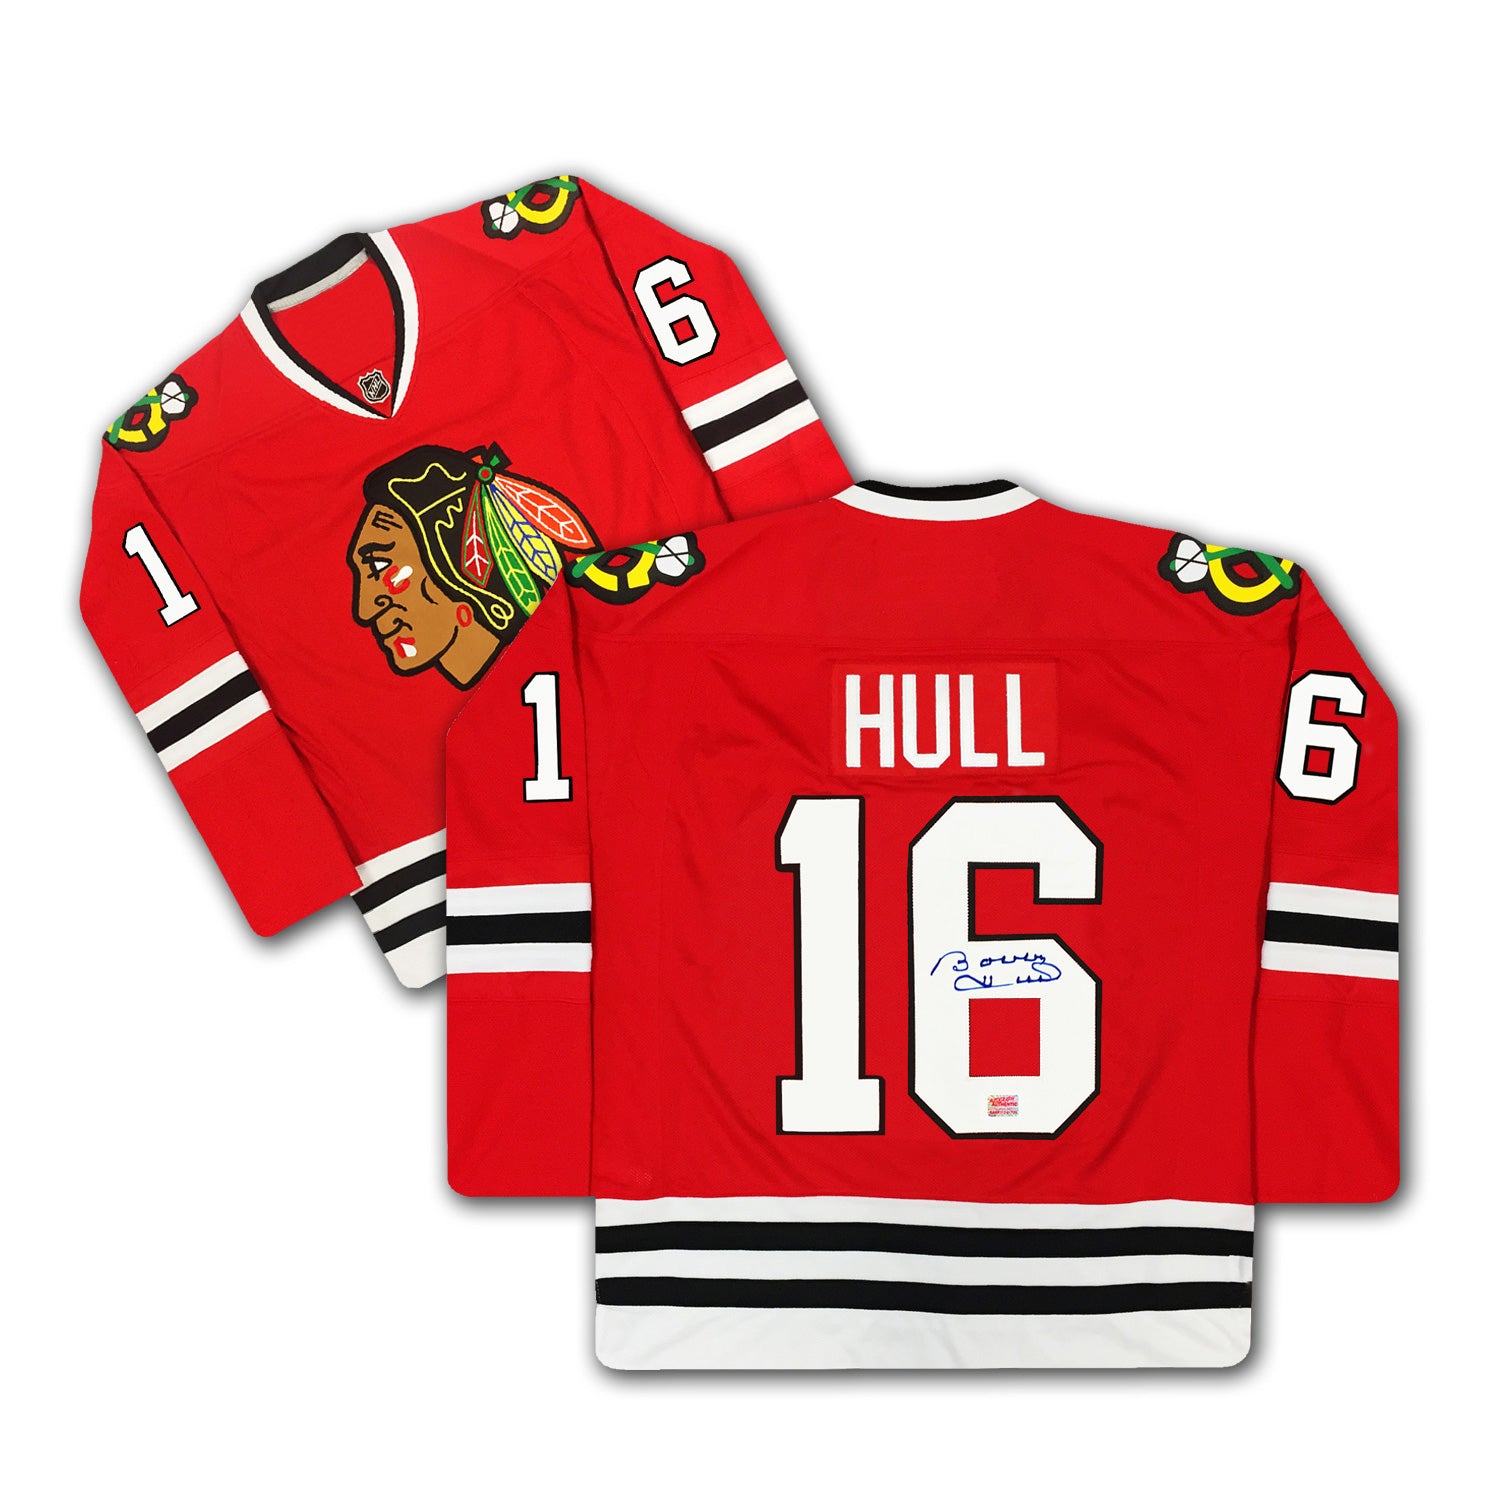 Reebok Chicago Blackhawks Bobby Hull Youth Red Premier Jersey w/ Authentic Lettering S/M = 6-10